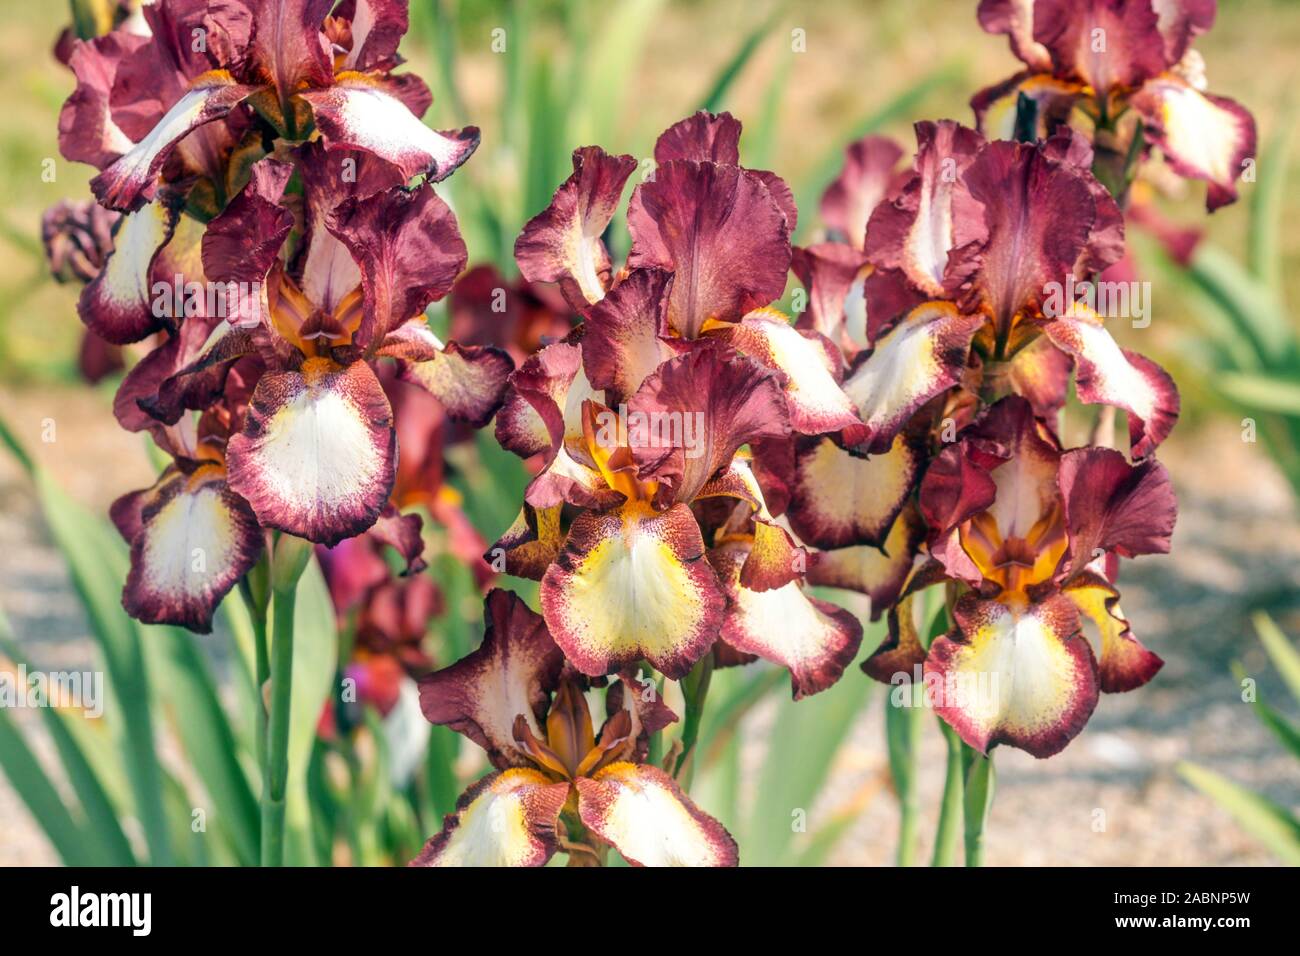 Red white chocolate color Tall bearded iris flowers 'Jet Fire' in garden border Stock Photo